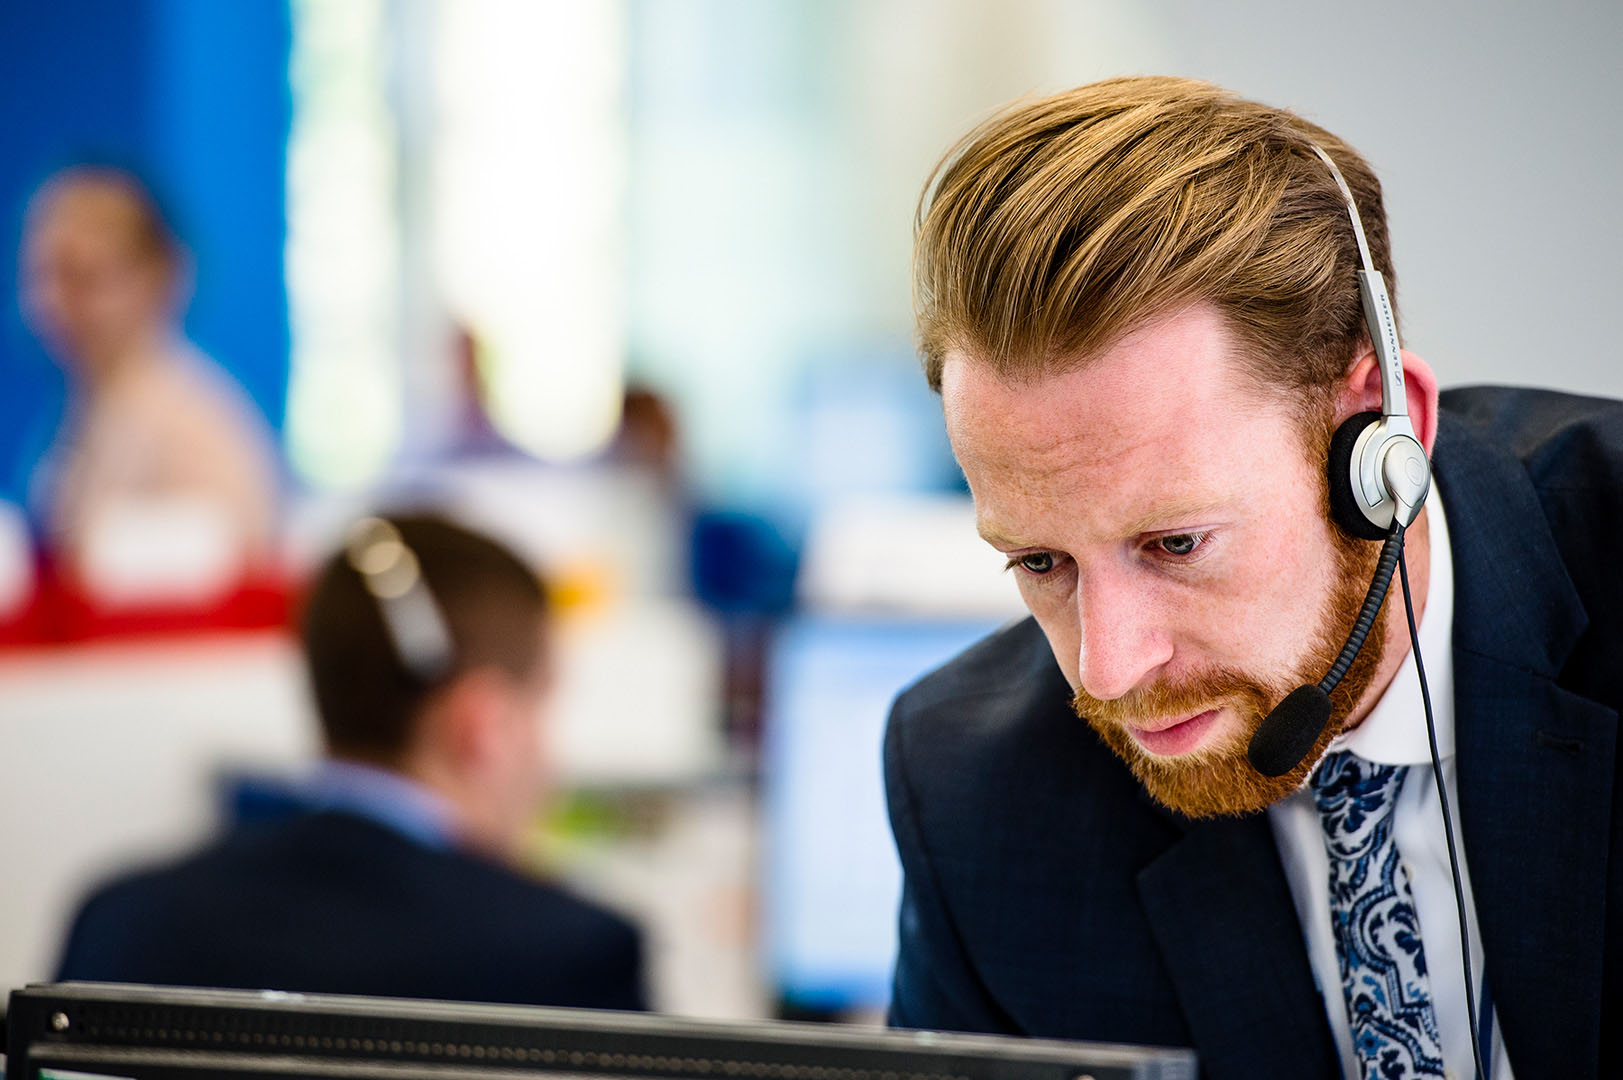 Man with headset leaning over looking at screen in customer support setting